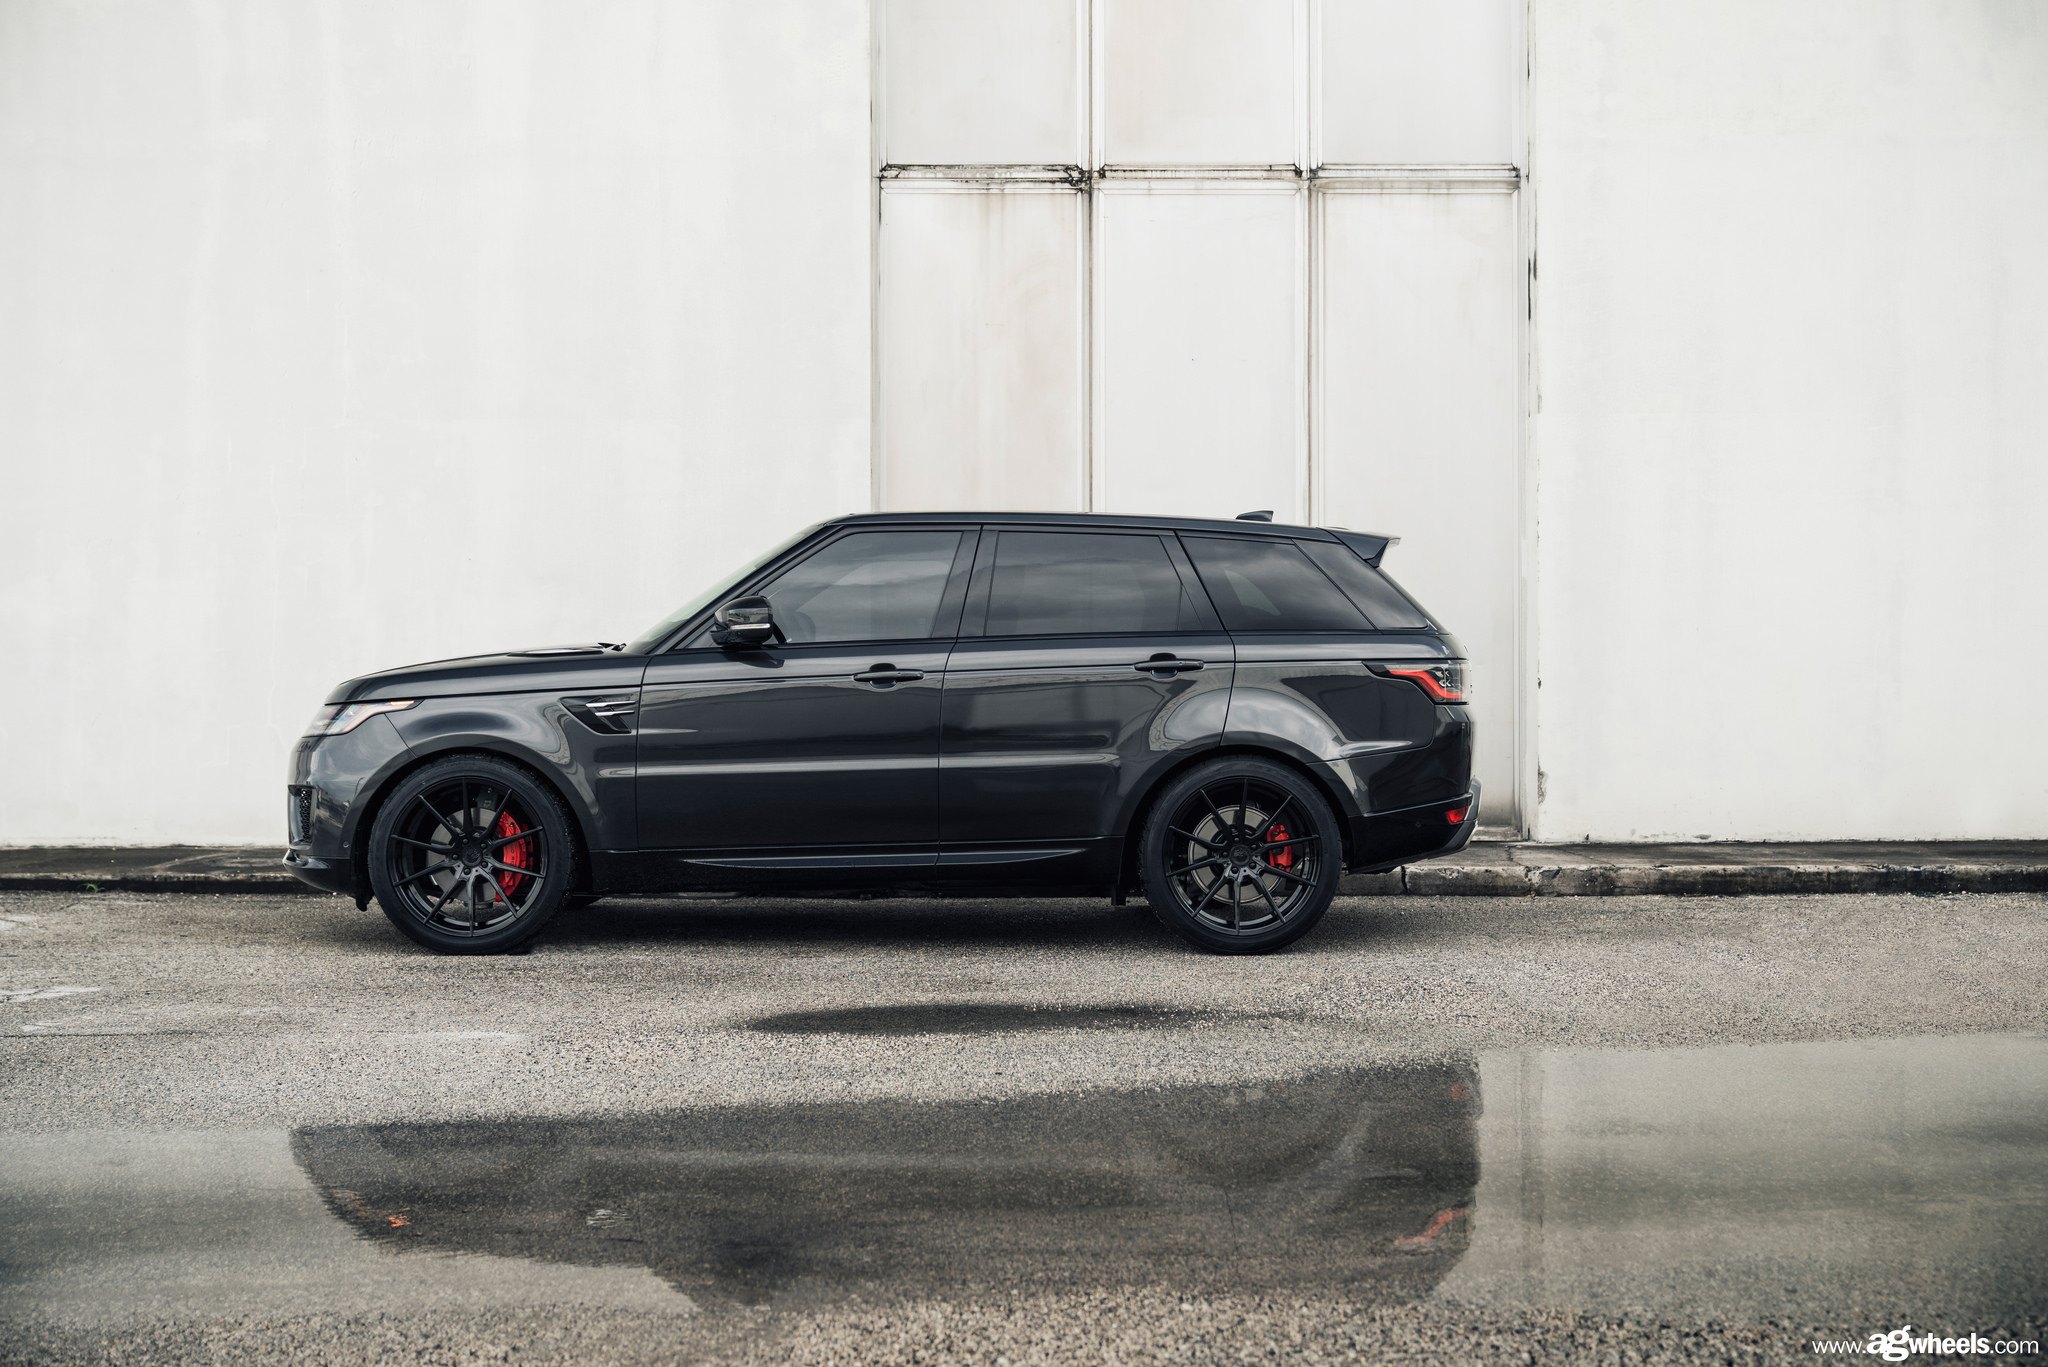 Gray Range Rover Sport with Aftermarket Side Skirts - Photo by Avant Garde Wheels